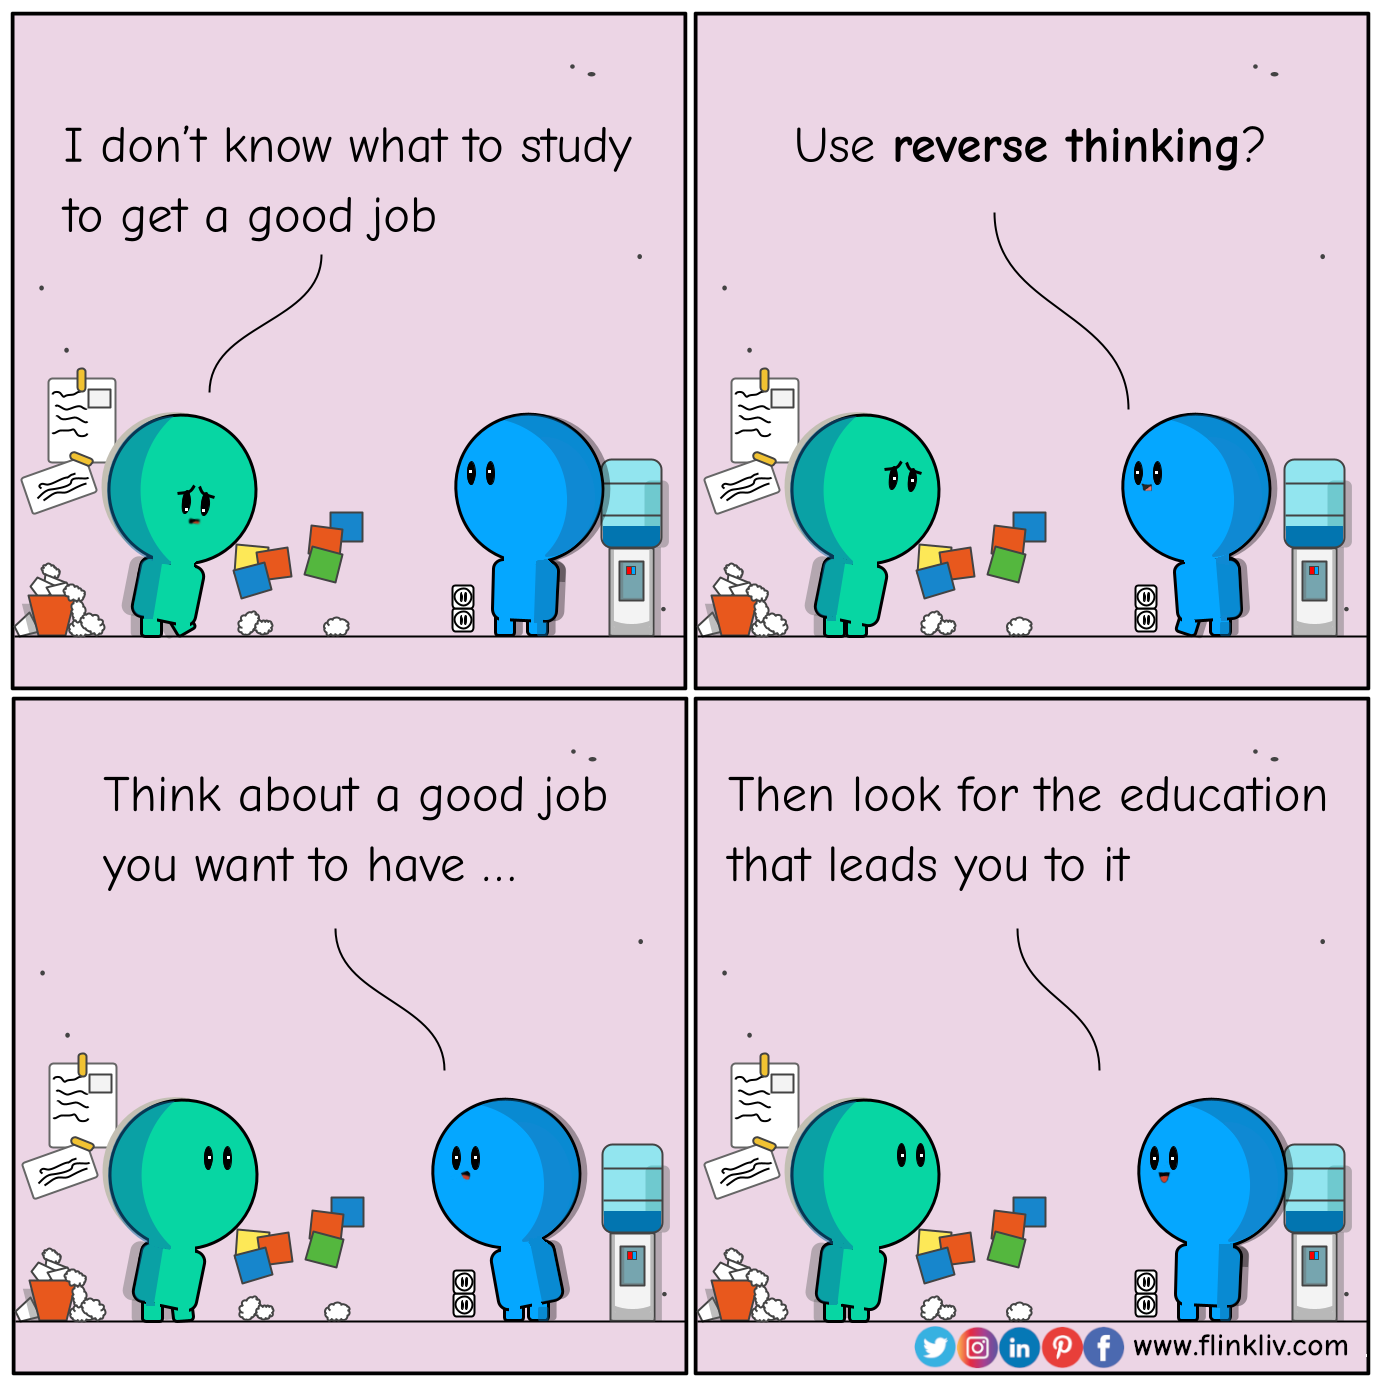 Conversation between A and B about how to get a good job with reverse thinking. 
			Converaation between A and Ba bout reverse thinking 
			A: I don’t know what to study to get a good job
			B: Use reverse thinking?
			A: What?
			B: Think about a good job, then look for the education that leads you to it
			A: Thanks
              